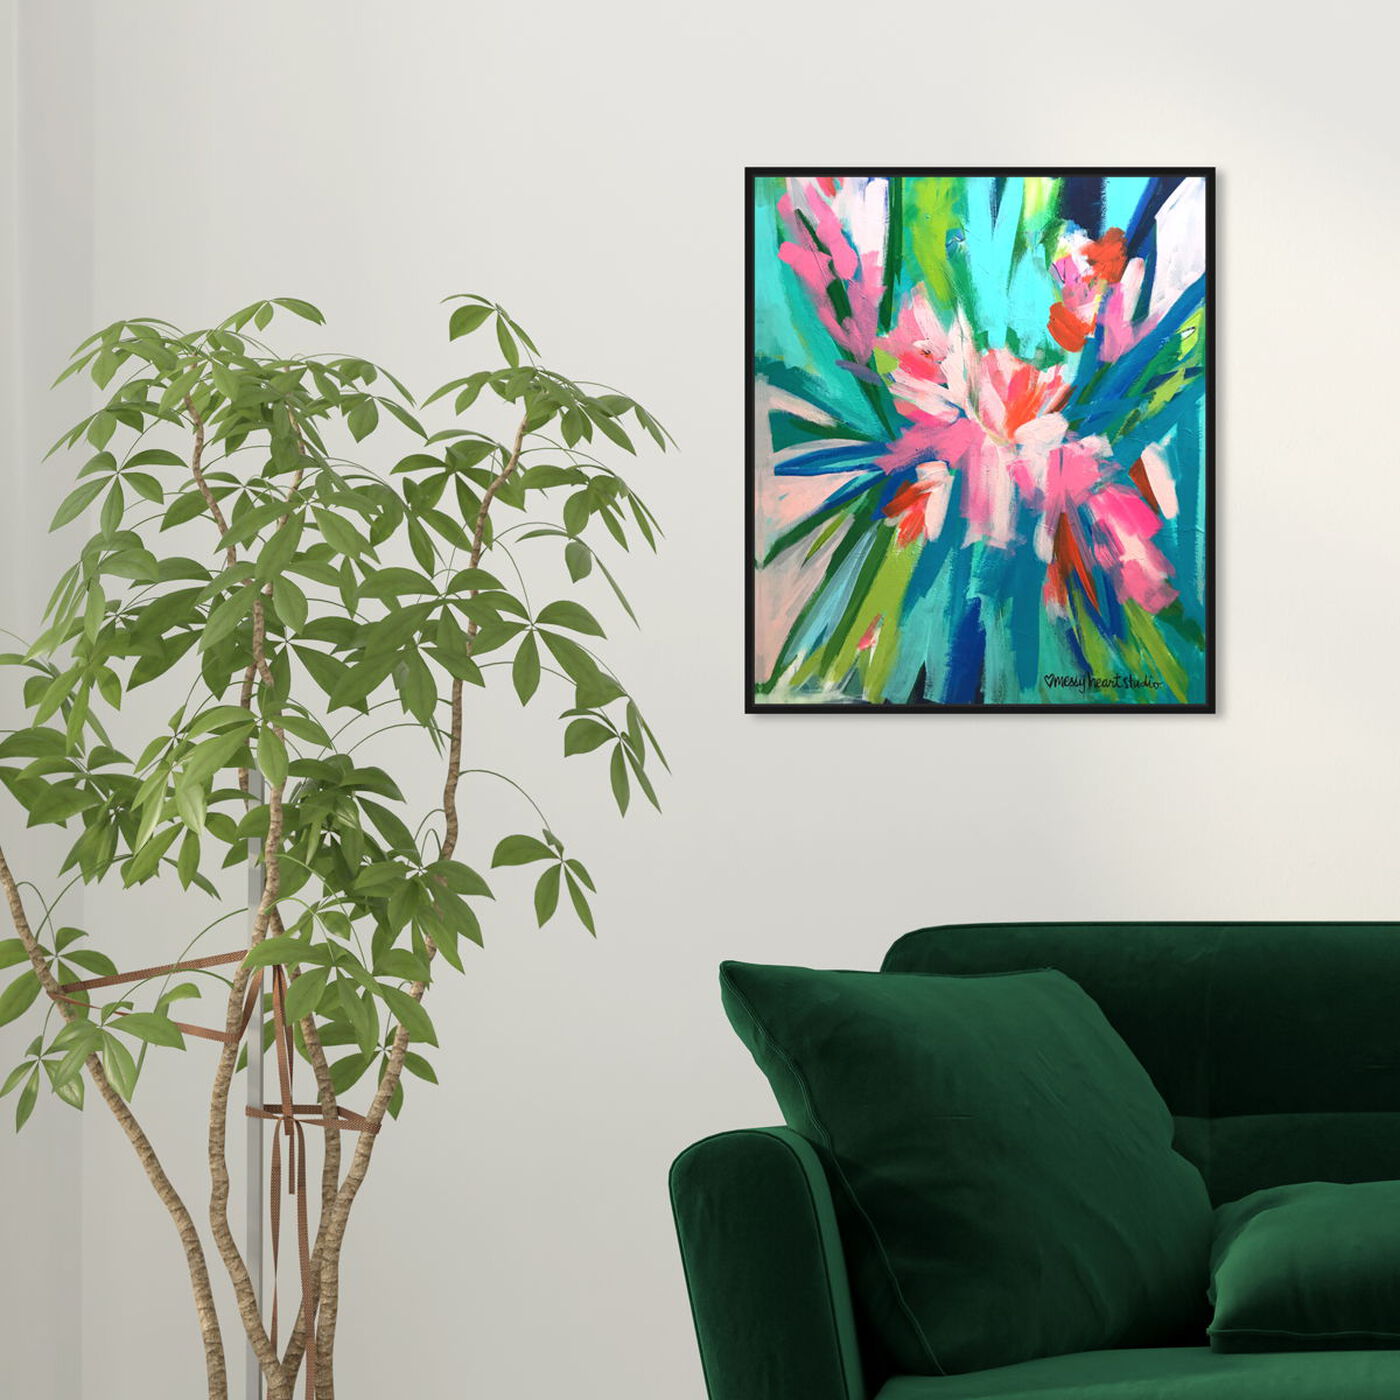 Hanging view of Lourdes Wackes -Garden Party II featuring abstract and flowers art.